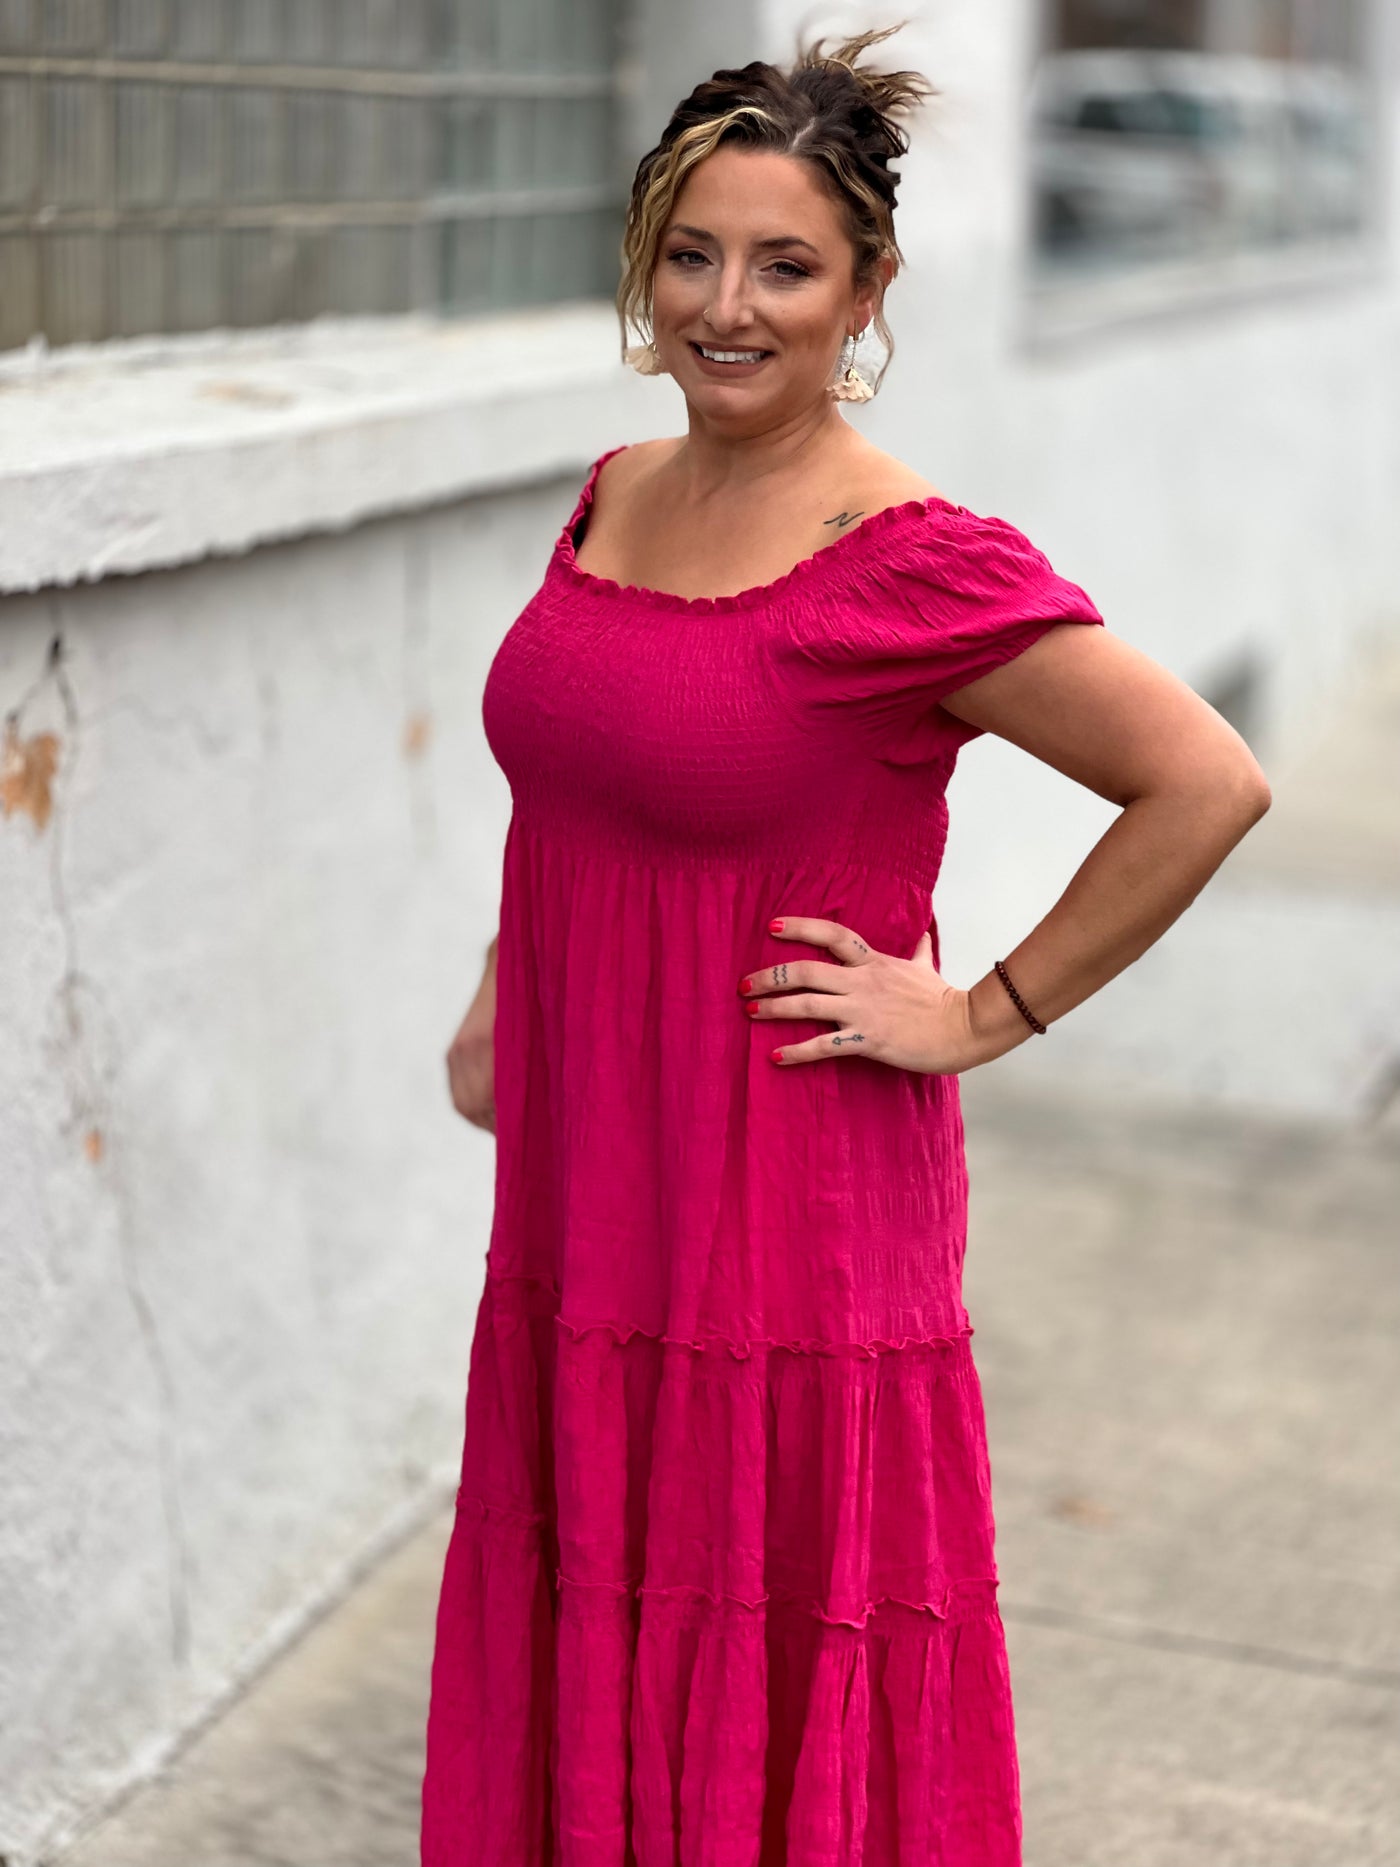 Pink Smocked Midi Dress - JustBelieve.Boutique